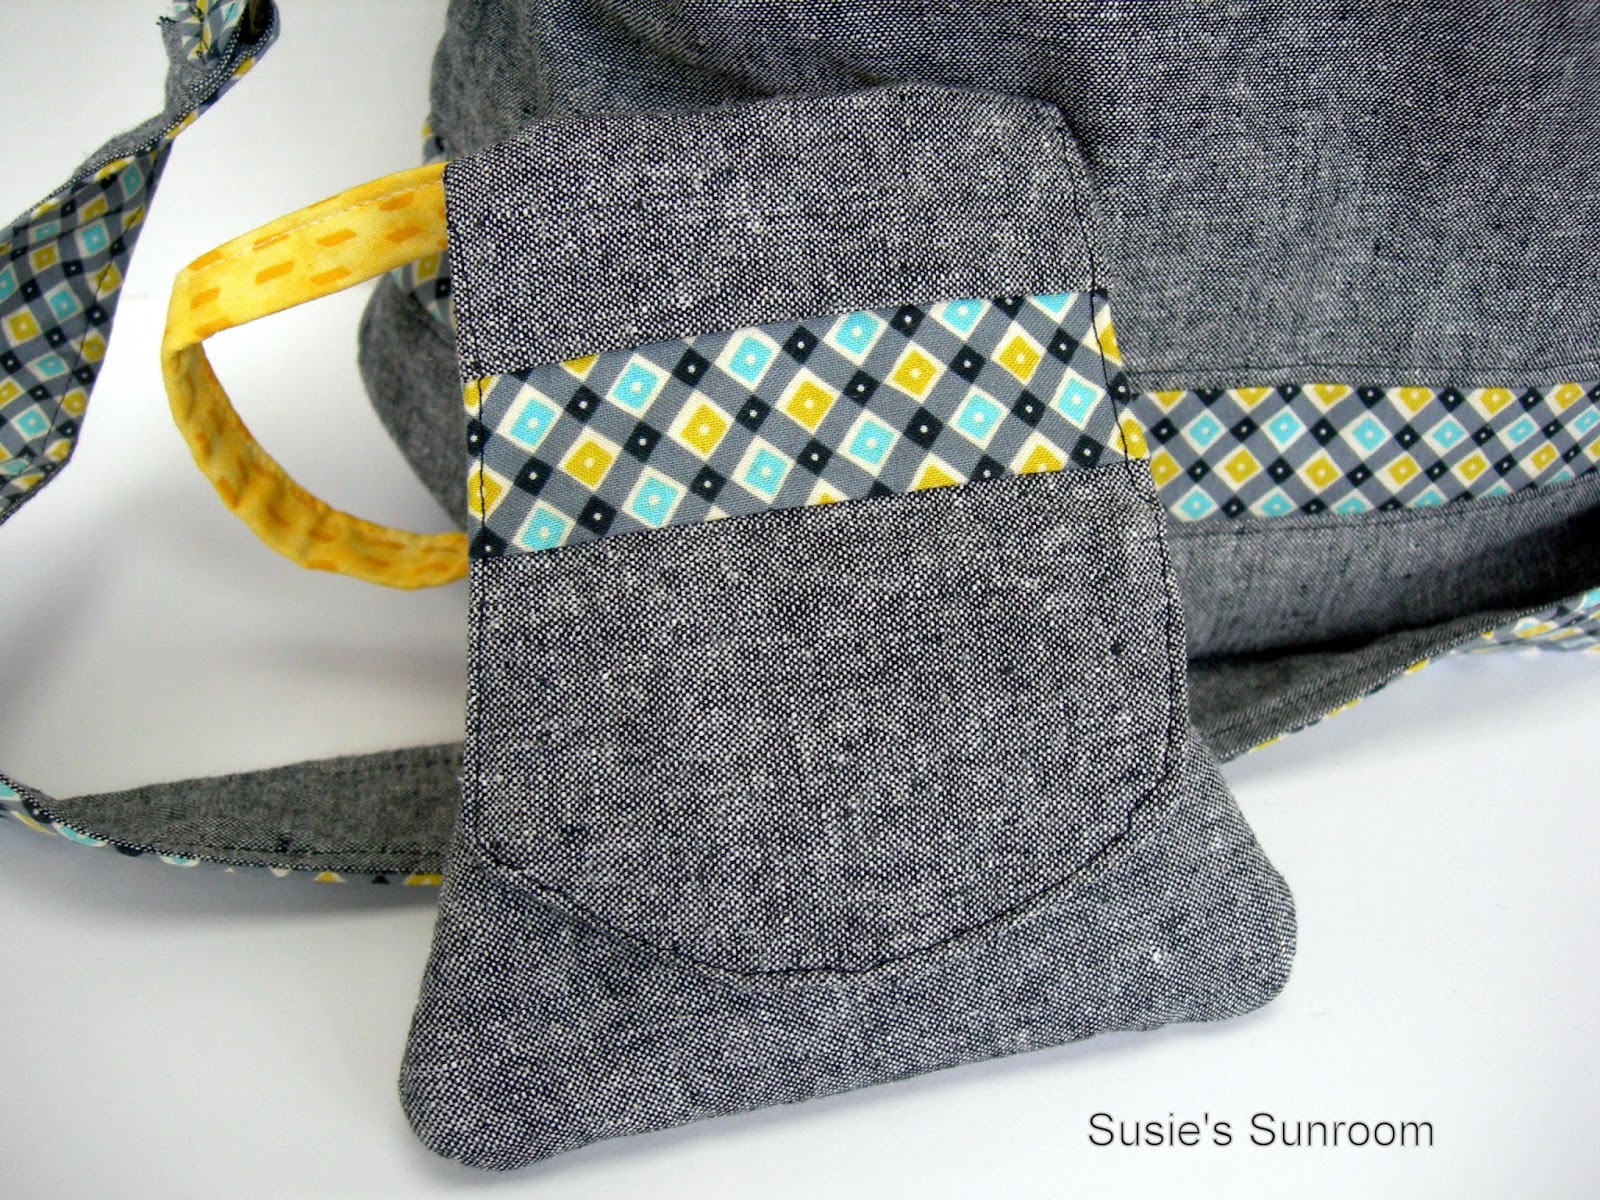 Susie's Sunroom: April's Across The Pond Sew Along Project